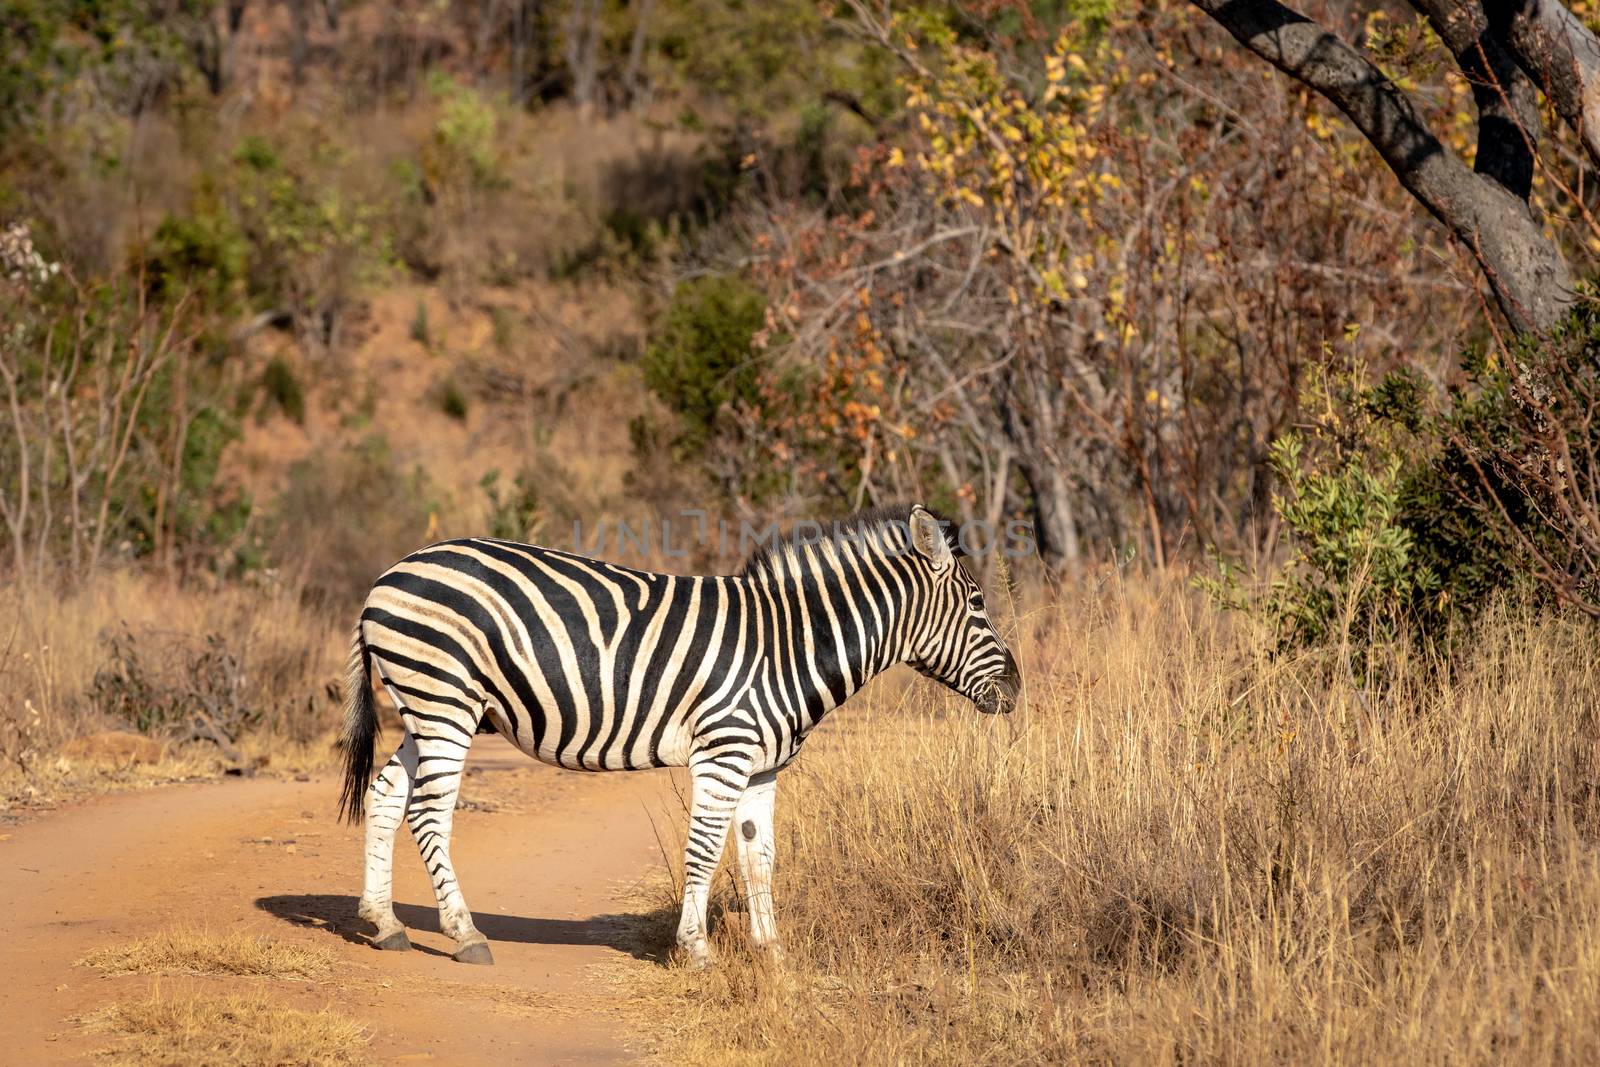 Zebra standing in the road in Africa. by Simoneemanphotography